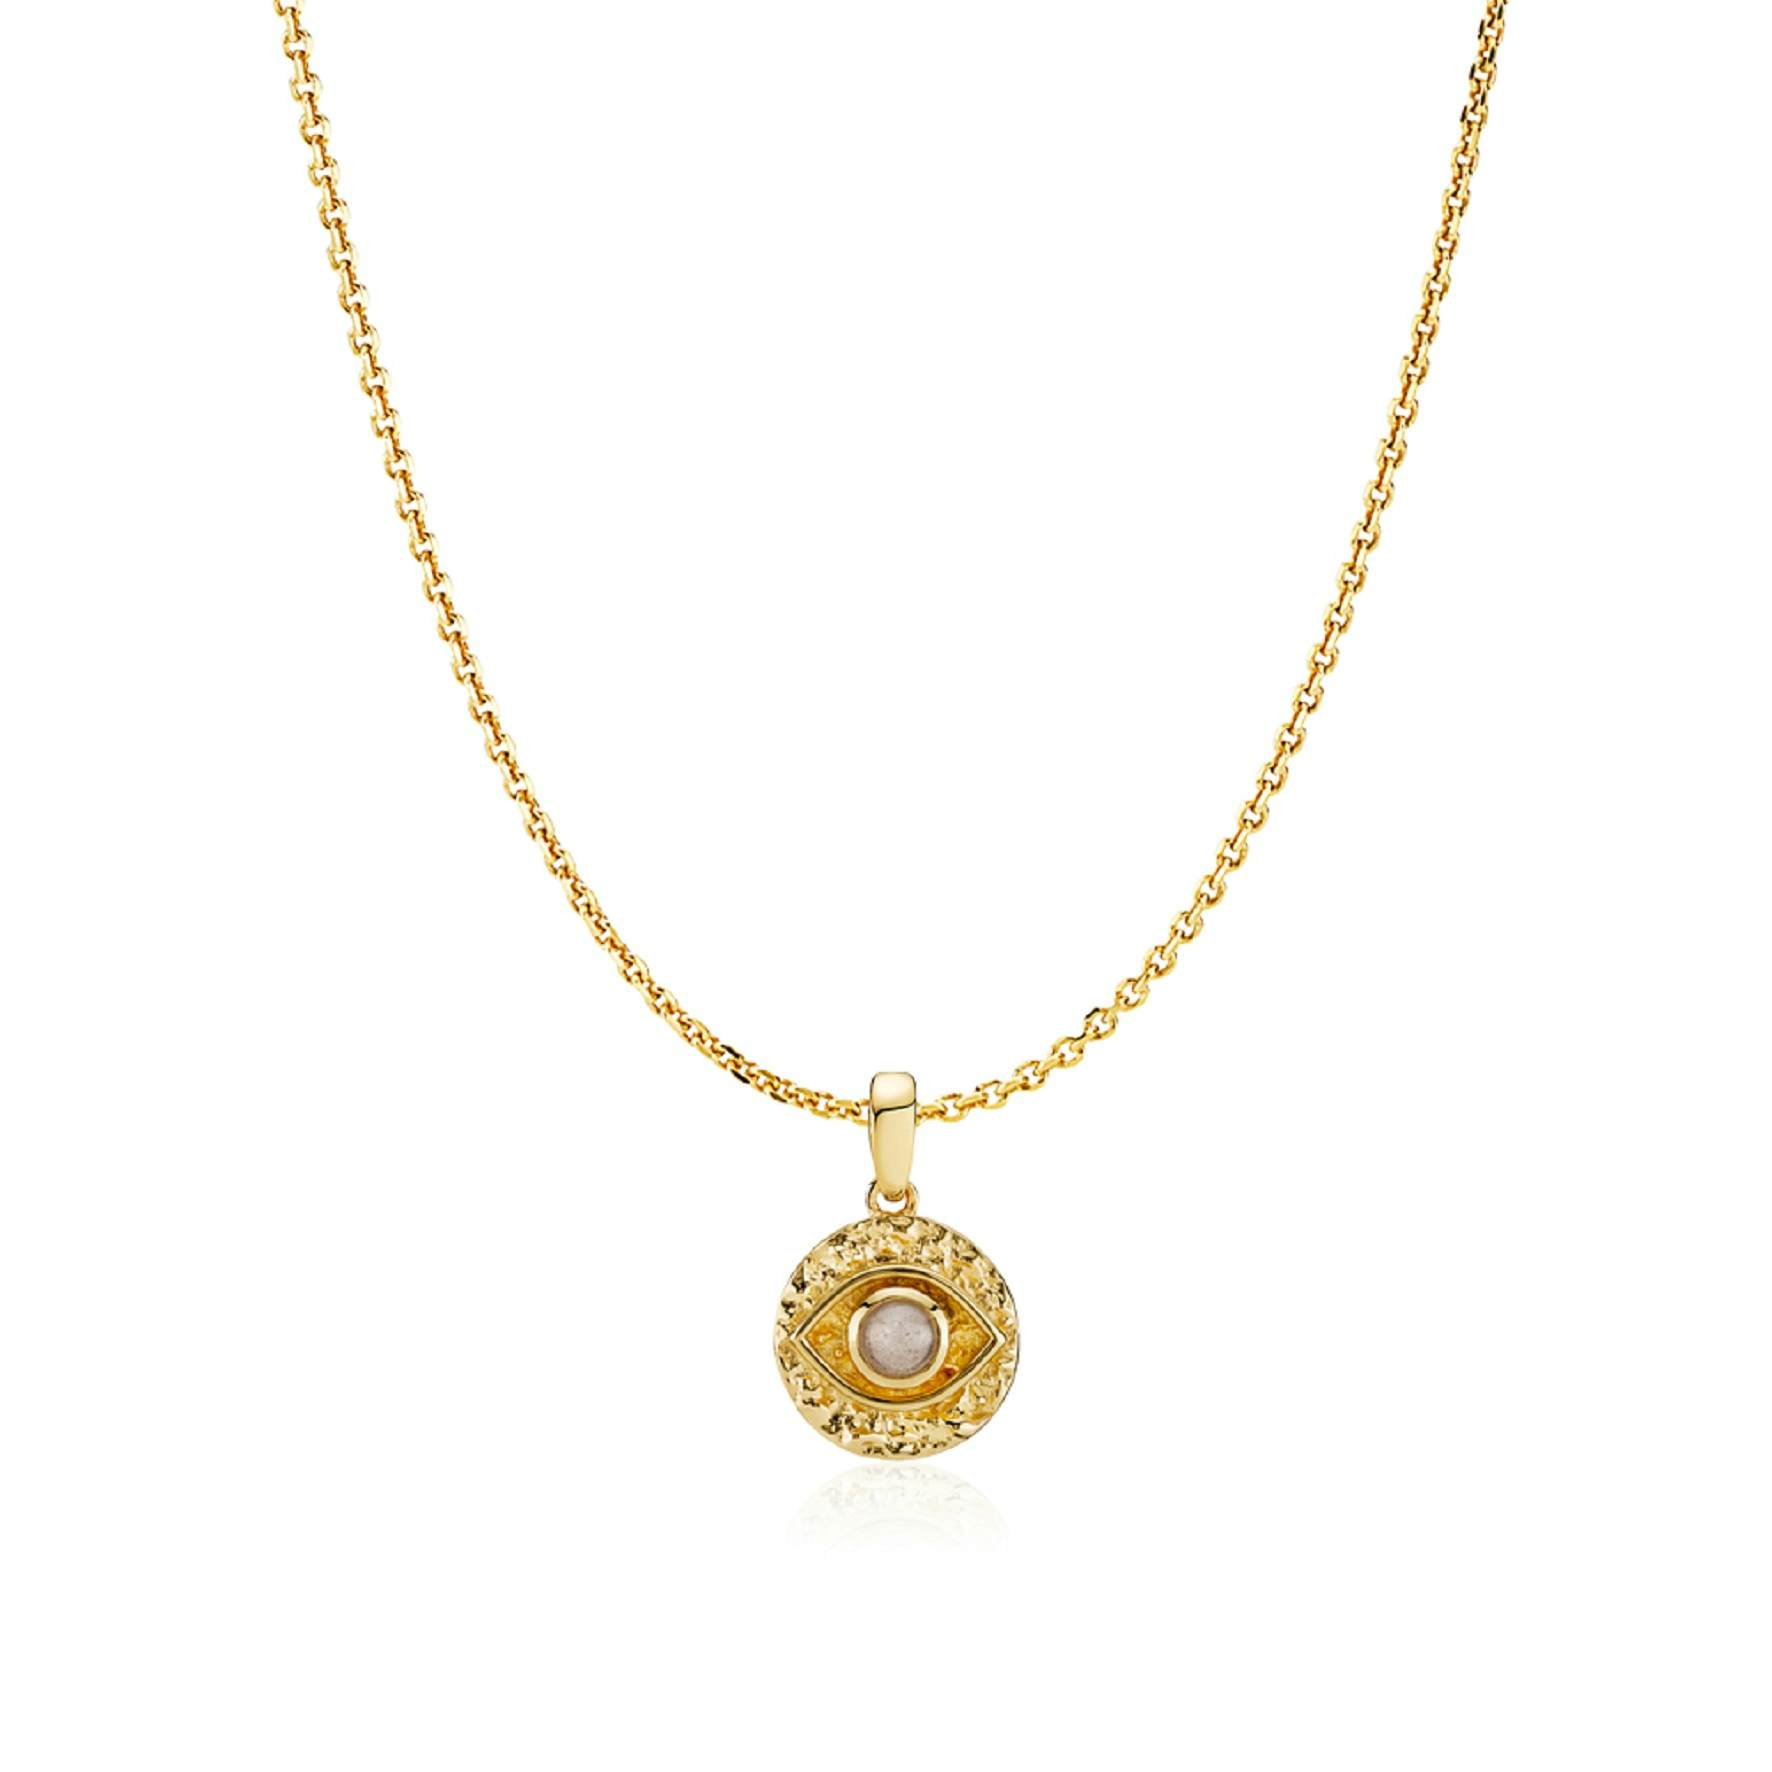 Hanna Martine by Sistie Necklace from Sistie in Goldplated-Silver Sterling 925